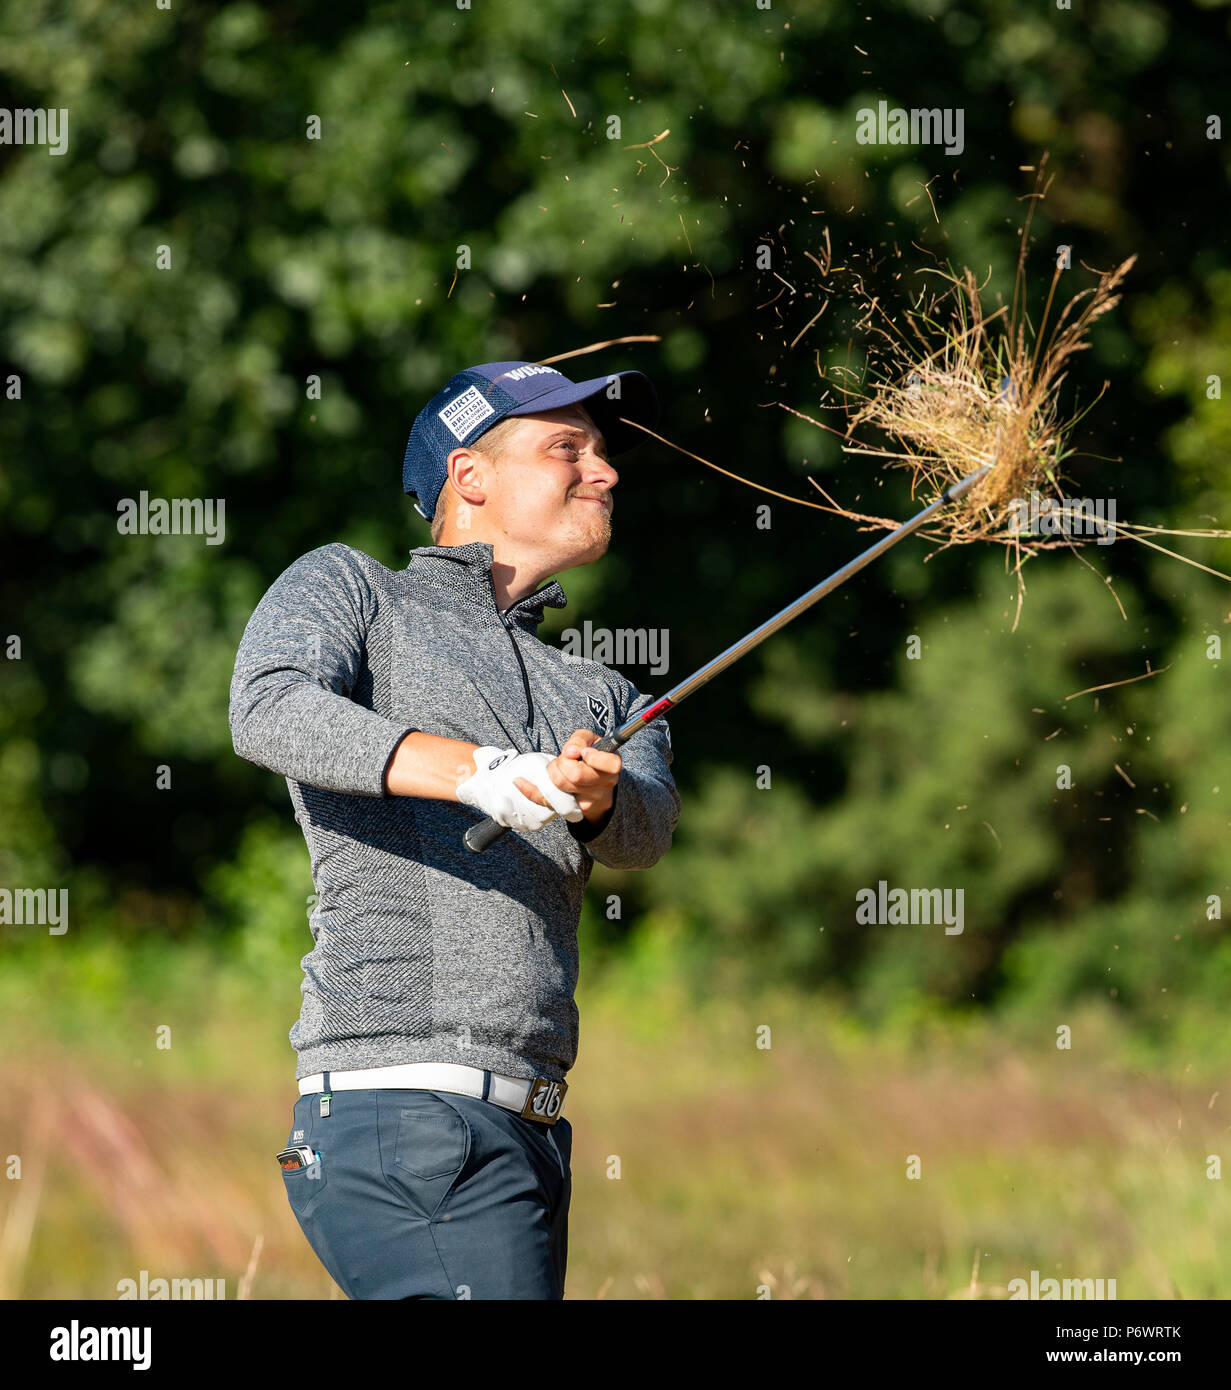 The Notts Golf Club, Nottinghamshire, UK. 3rd July 2018, Open Qualifier, The Notts Golf Club, The grass is flying as a shot is played from the rough Credit: David Kissman/Alamy Live News Stock Photo